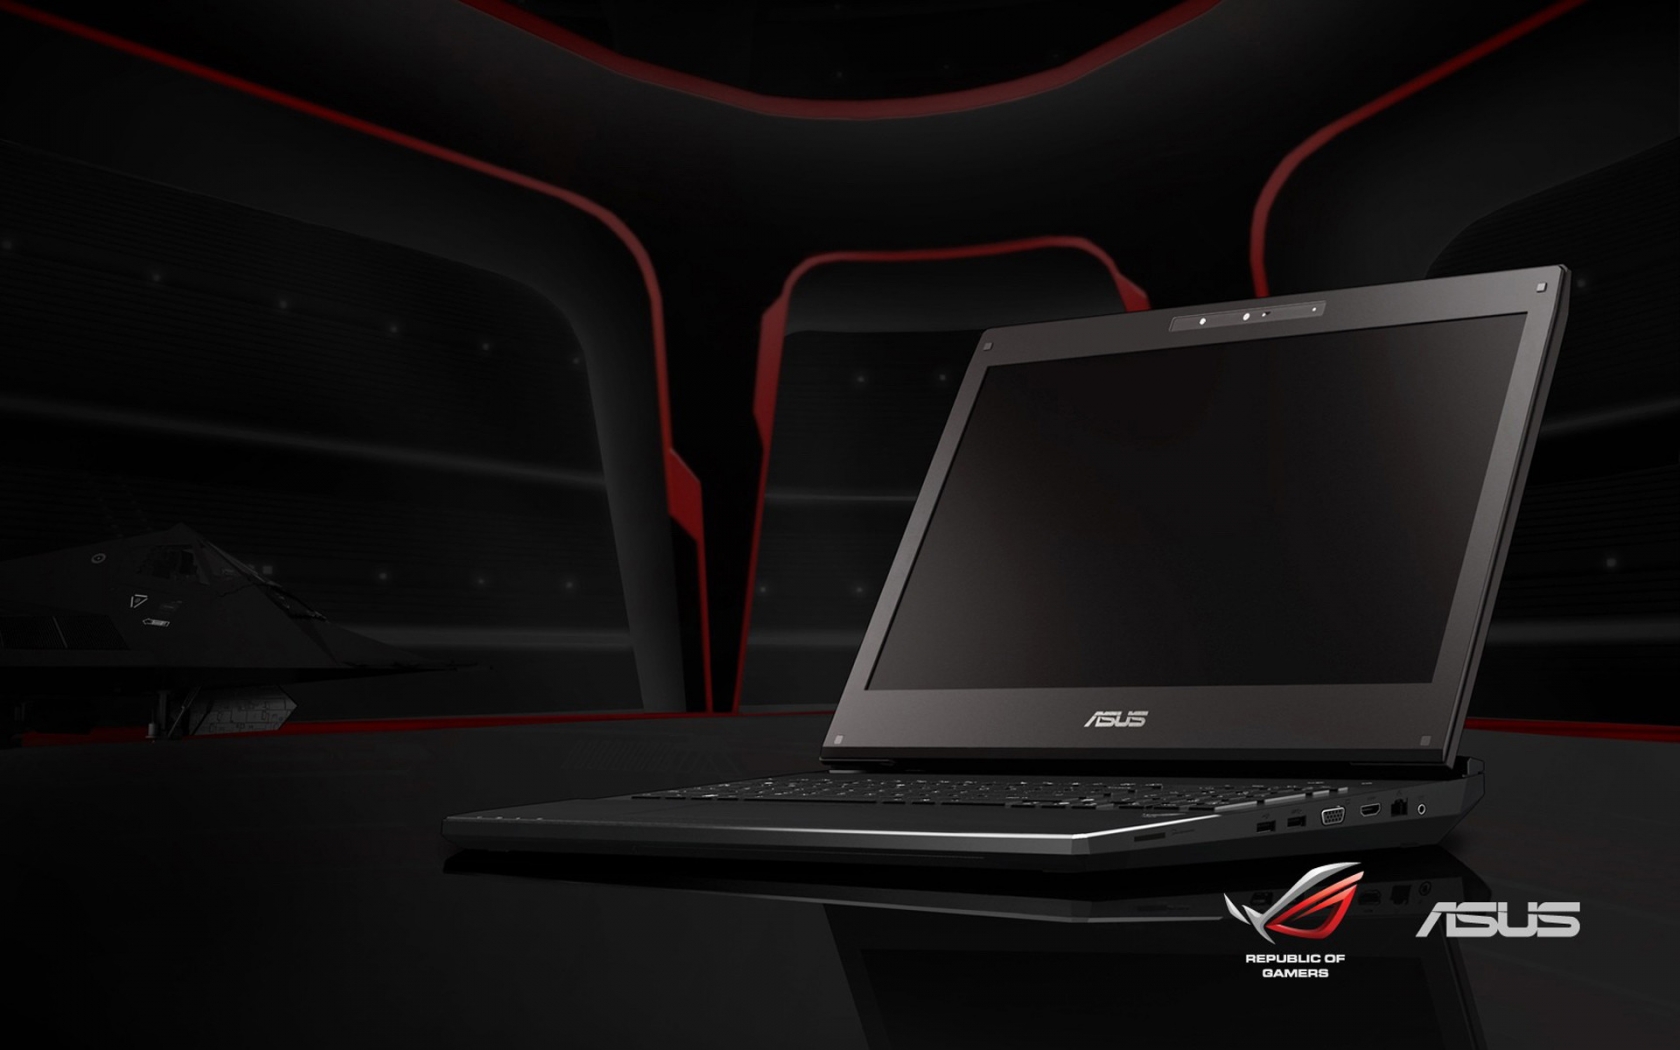 Asus Notebook for 1680 x 1050 widescreen resolution